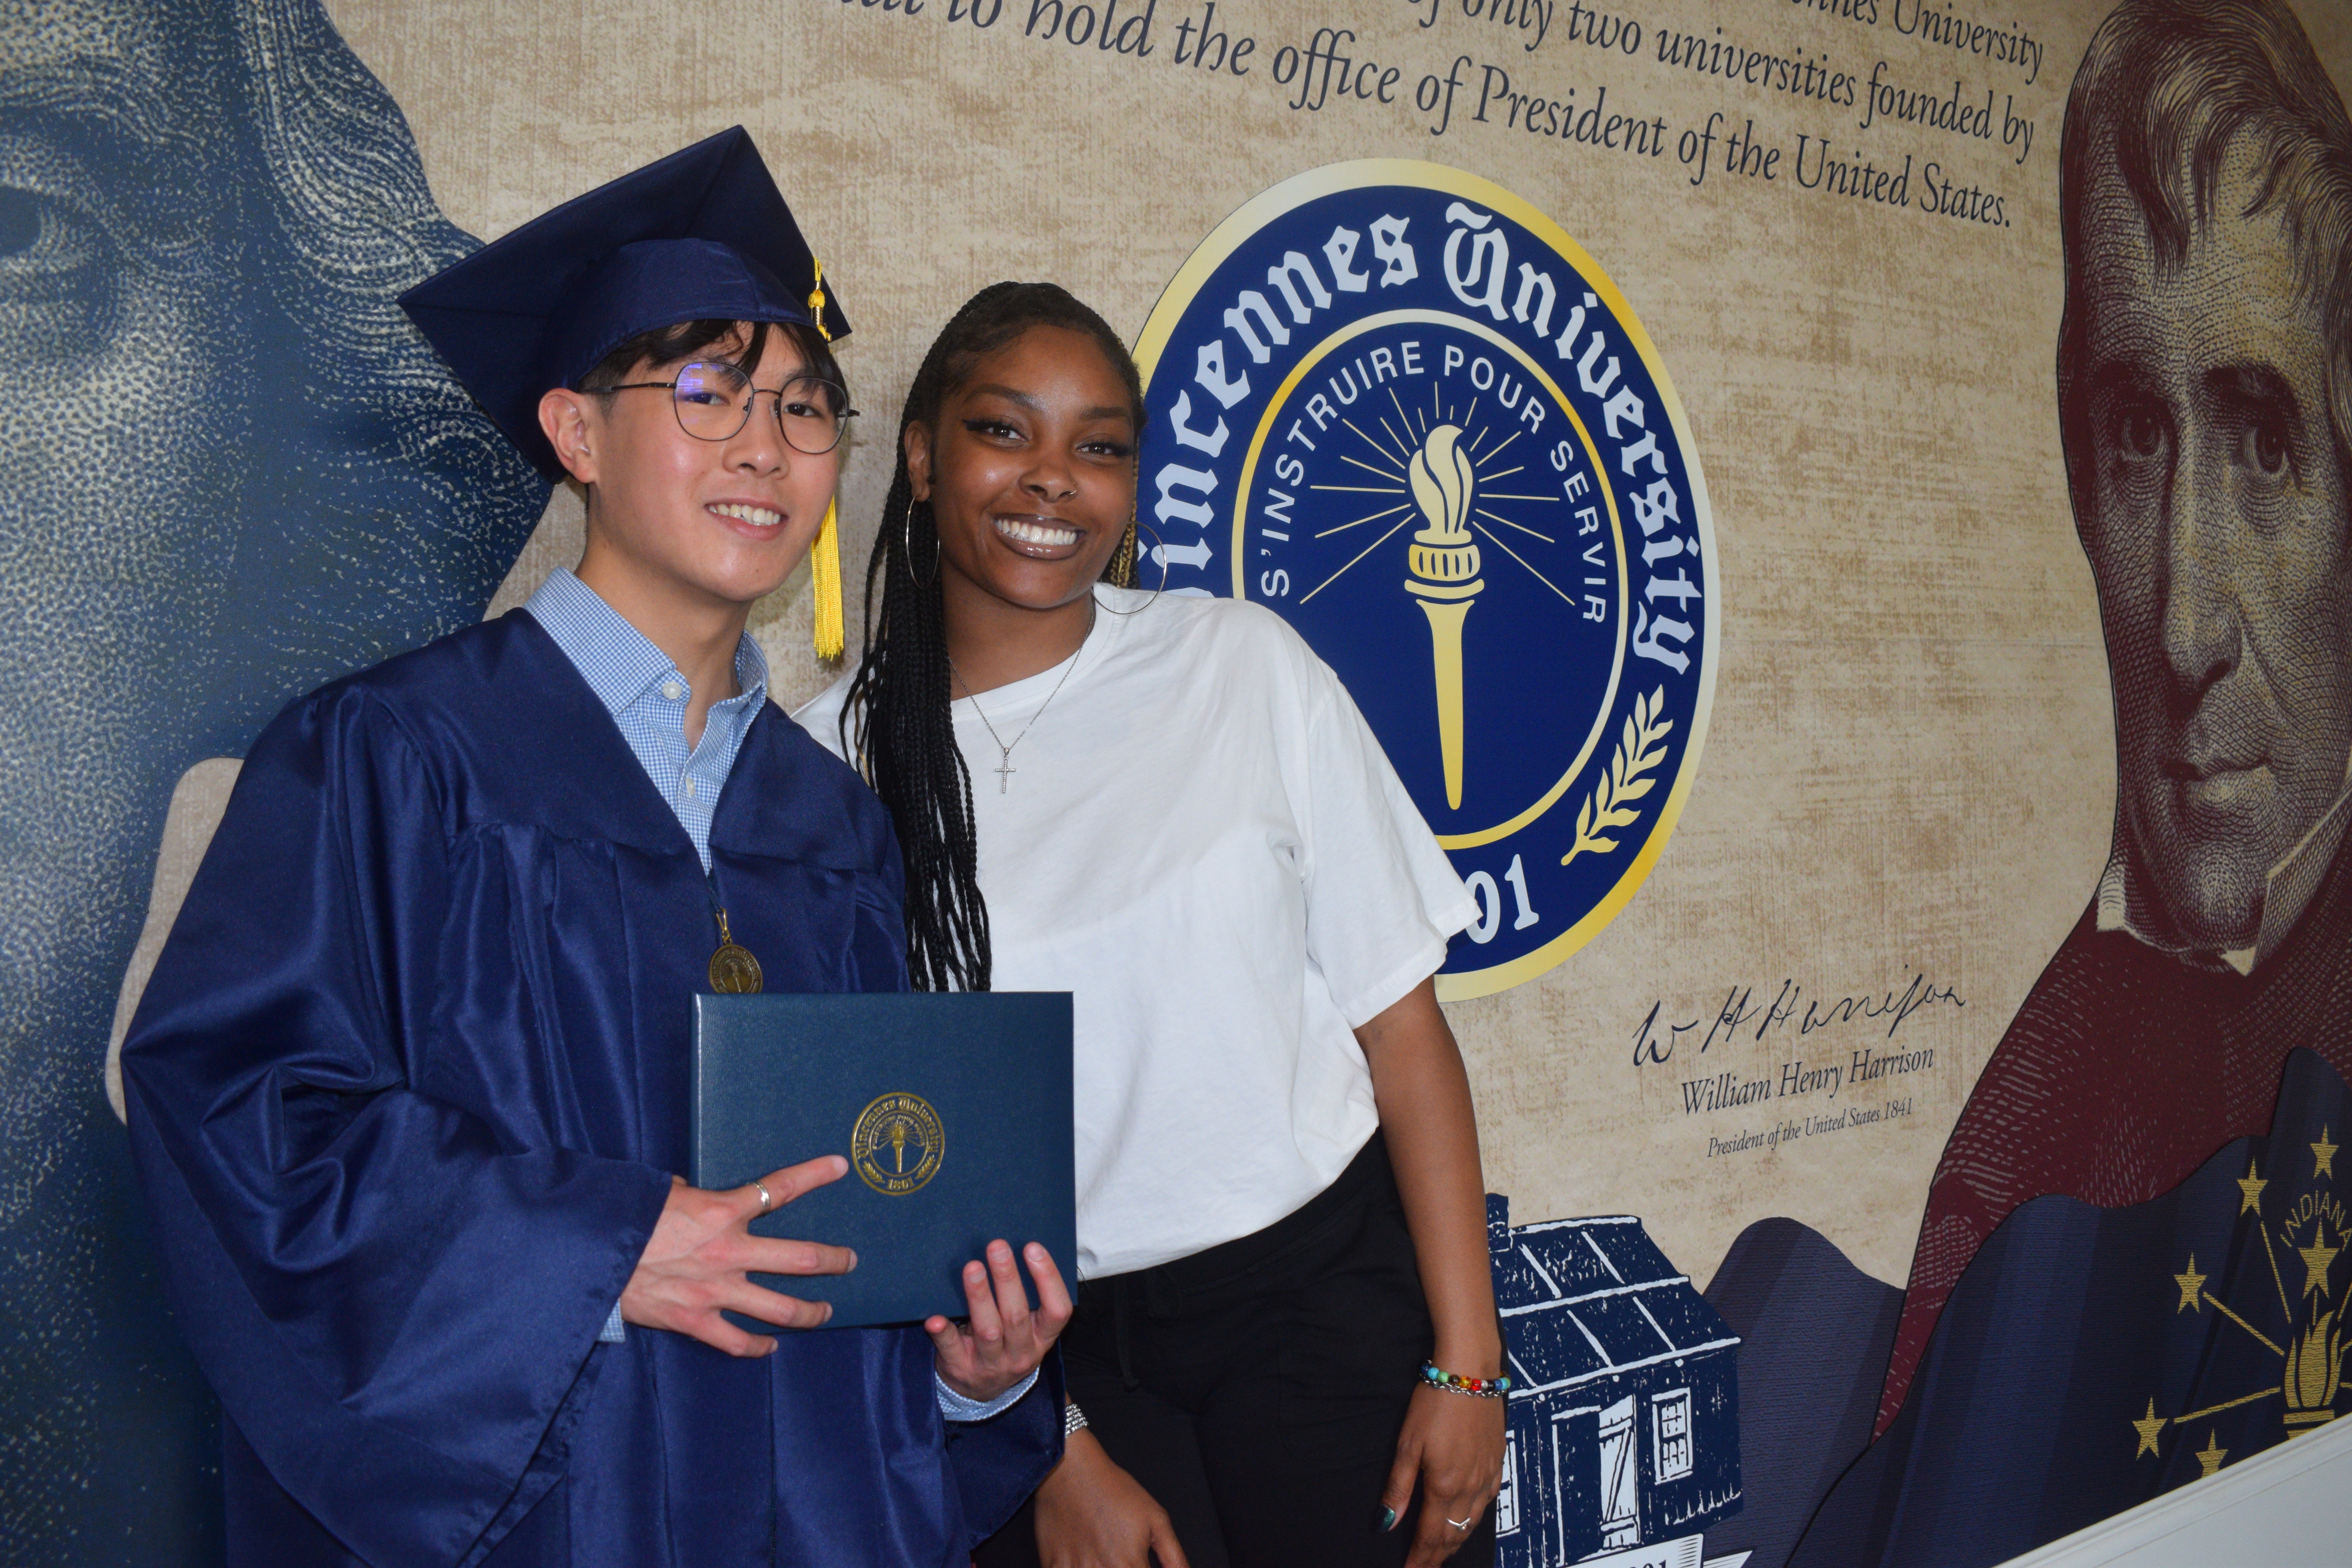 Samuel Lo wears a graduation cap and gown while holding a VU degree cover. A female student stands next to him. The students stand in front of a VU mural featuring Thomas Jefferson, William Henry Harrison, and the VU Seal plus Indiana and American flags.